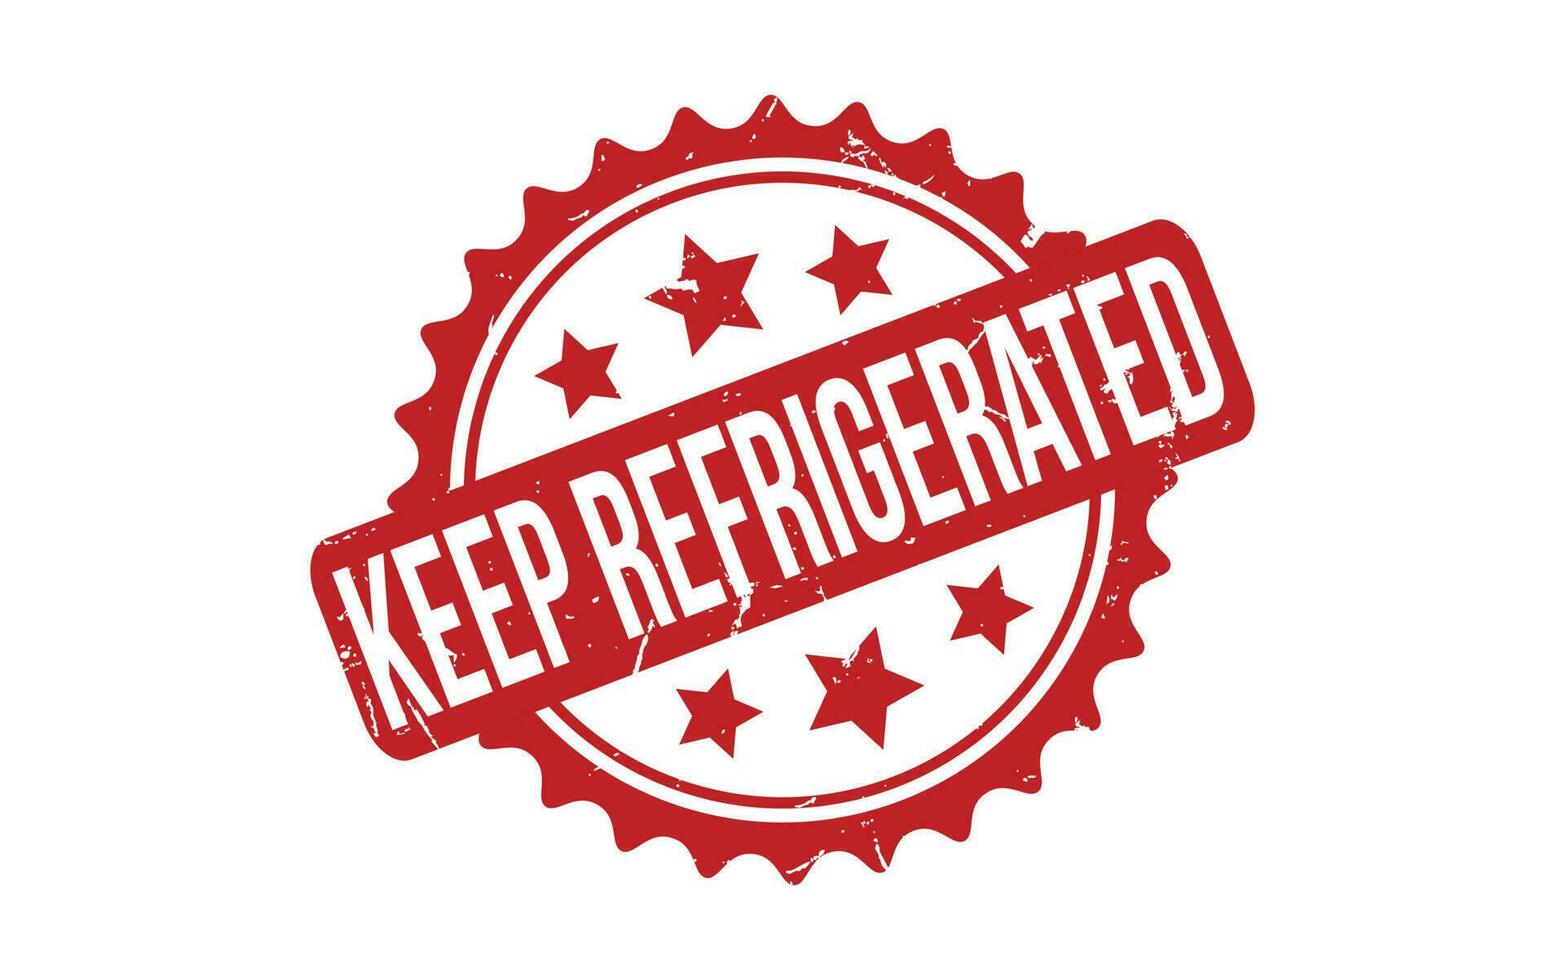 Keep Refrigerated rubber grunge stamp seal vector